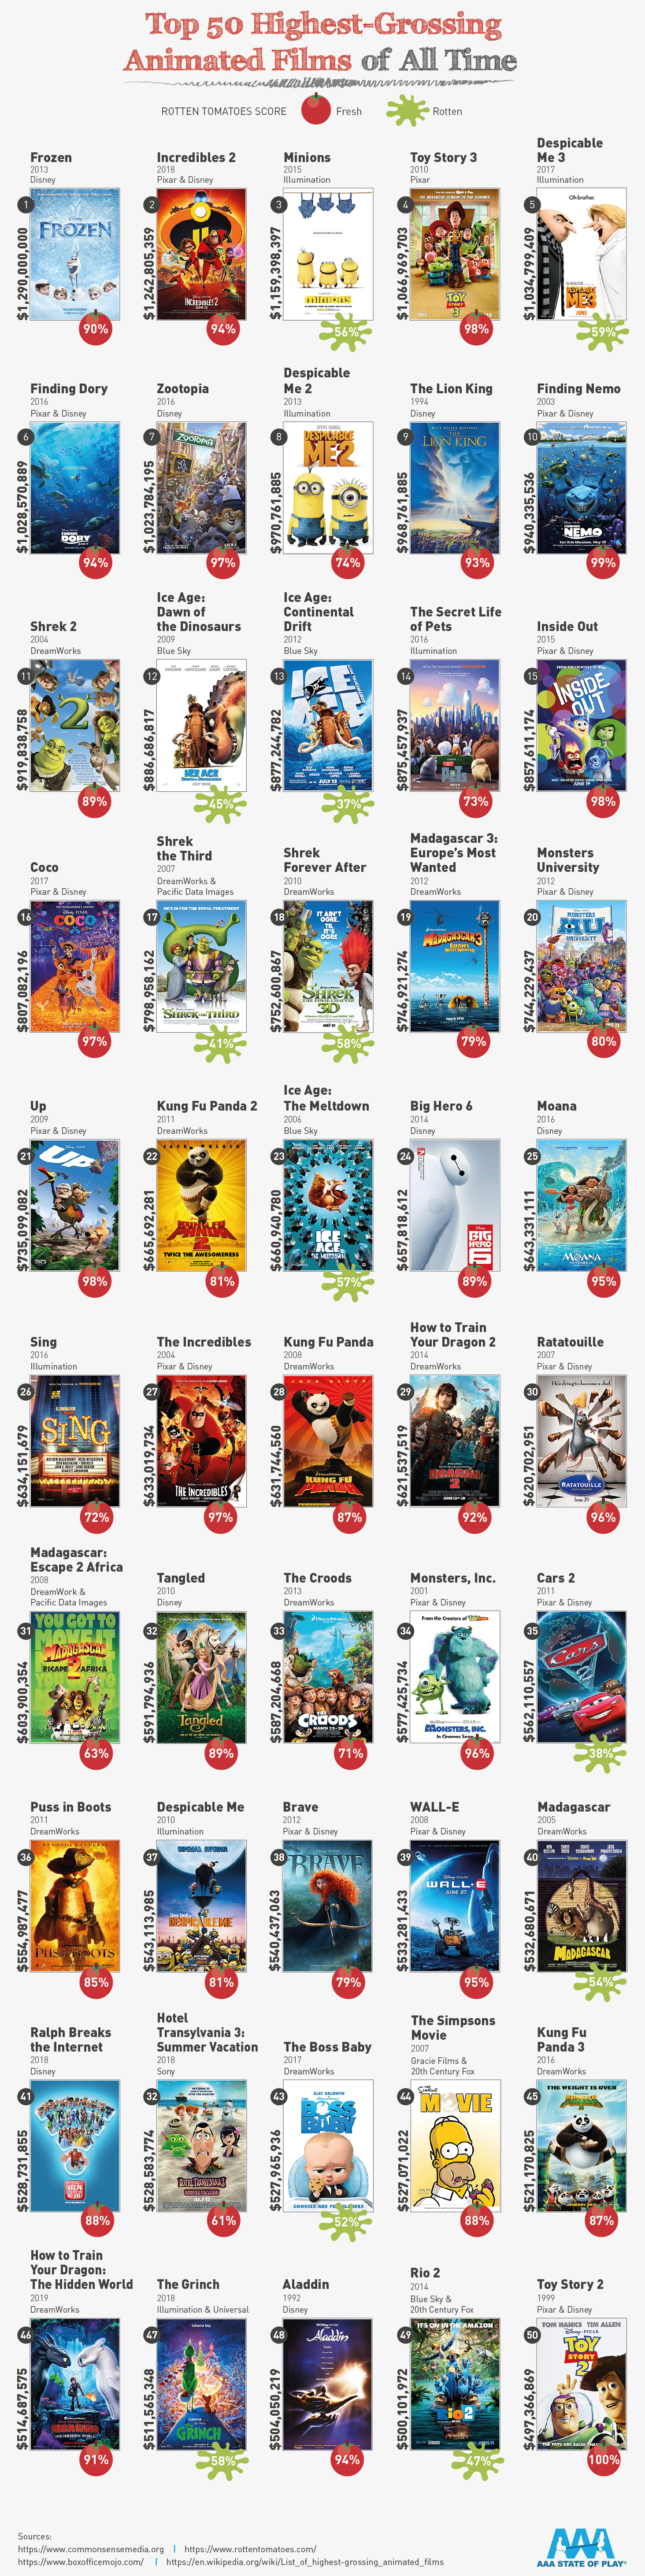 30 Highest Grossing Animated Movies of All Time Worldwide